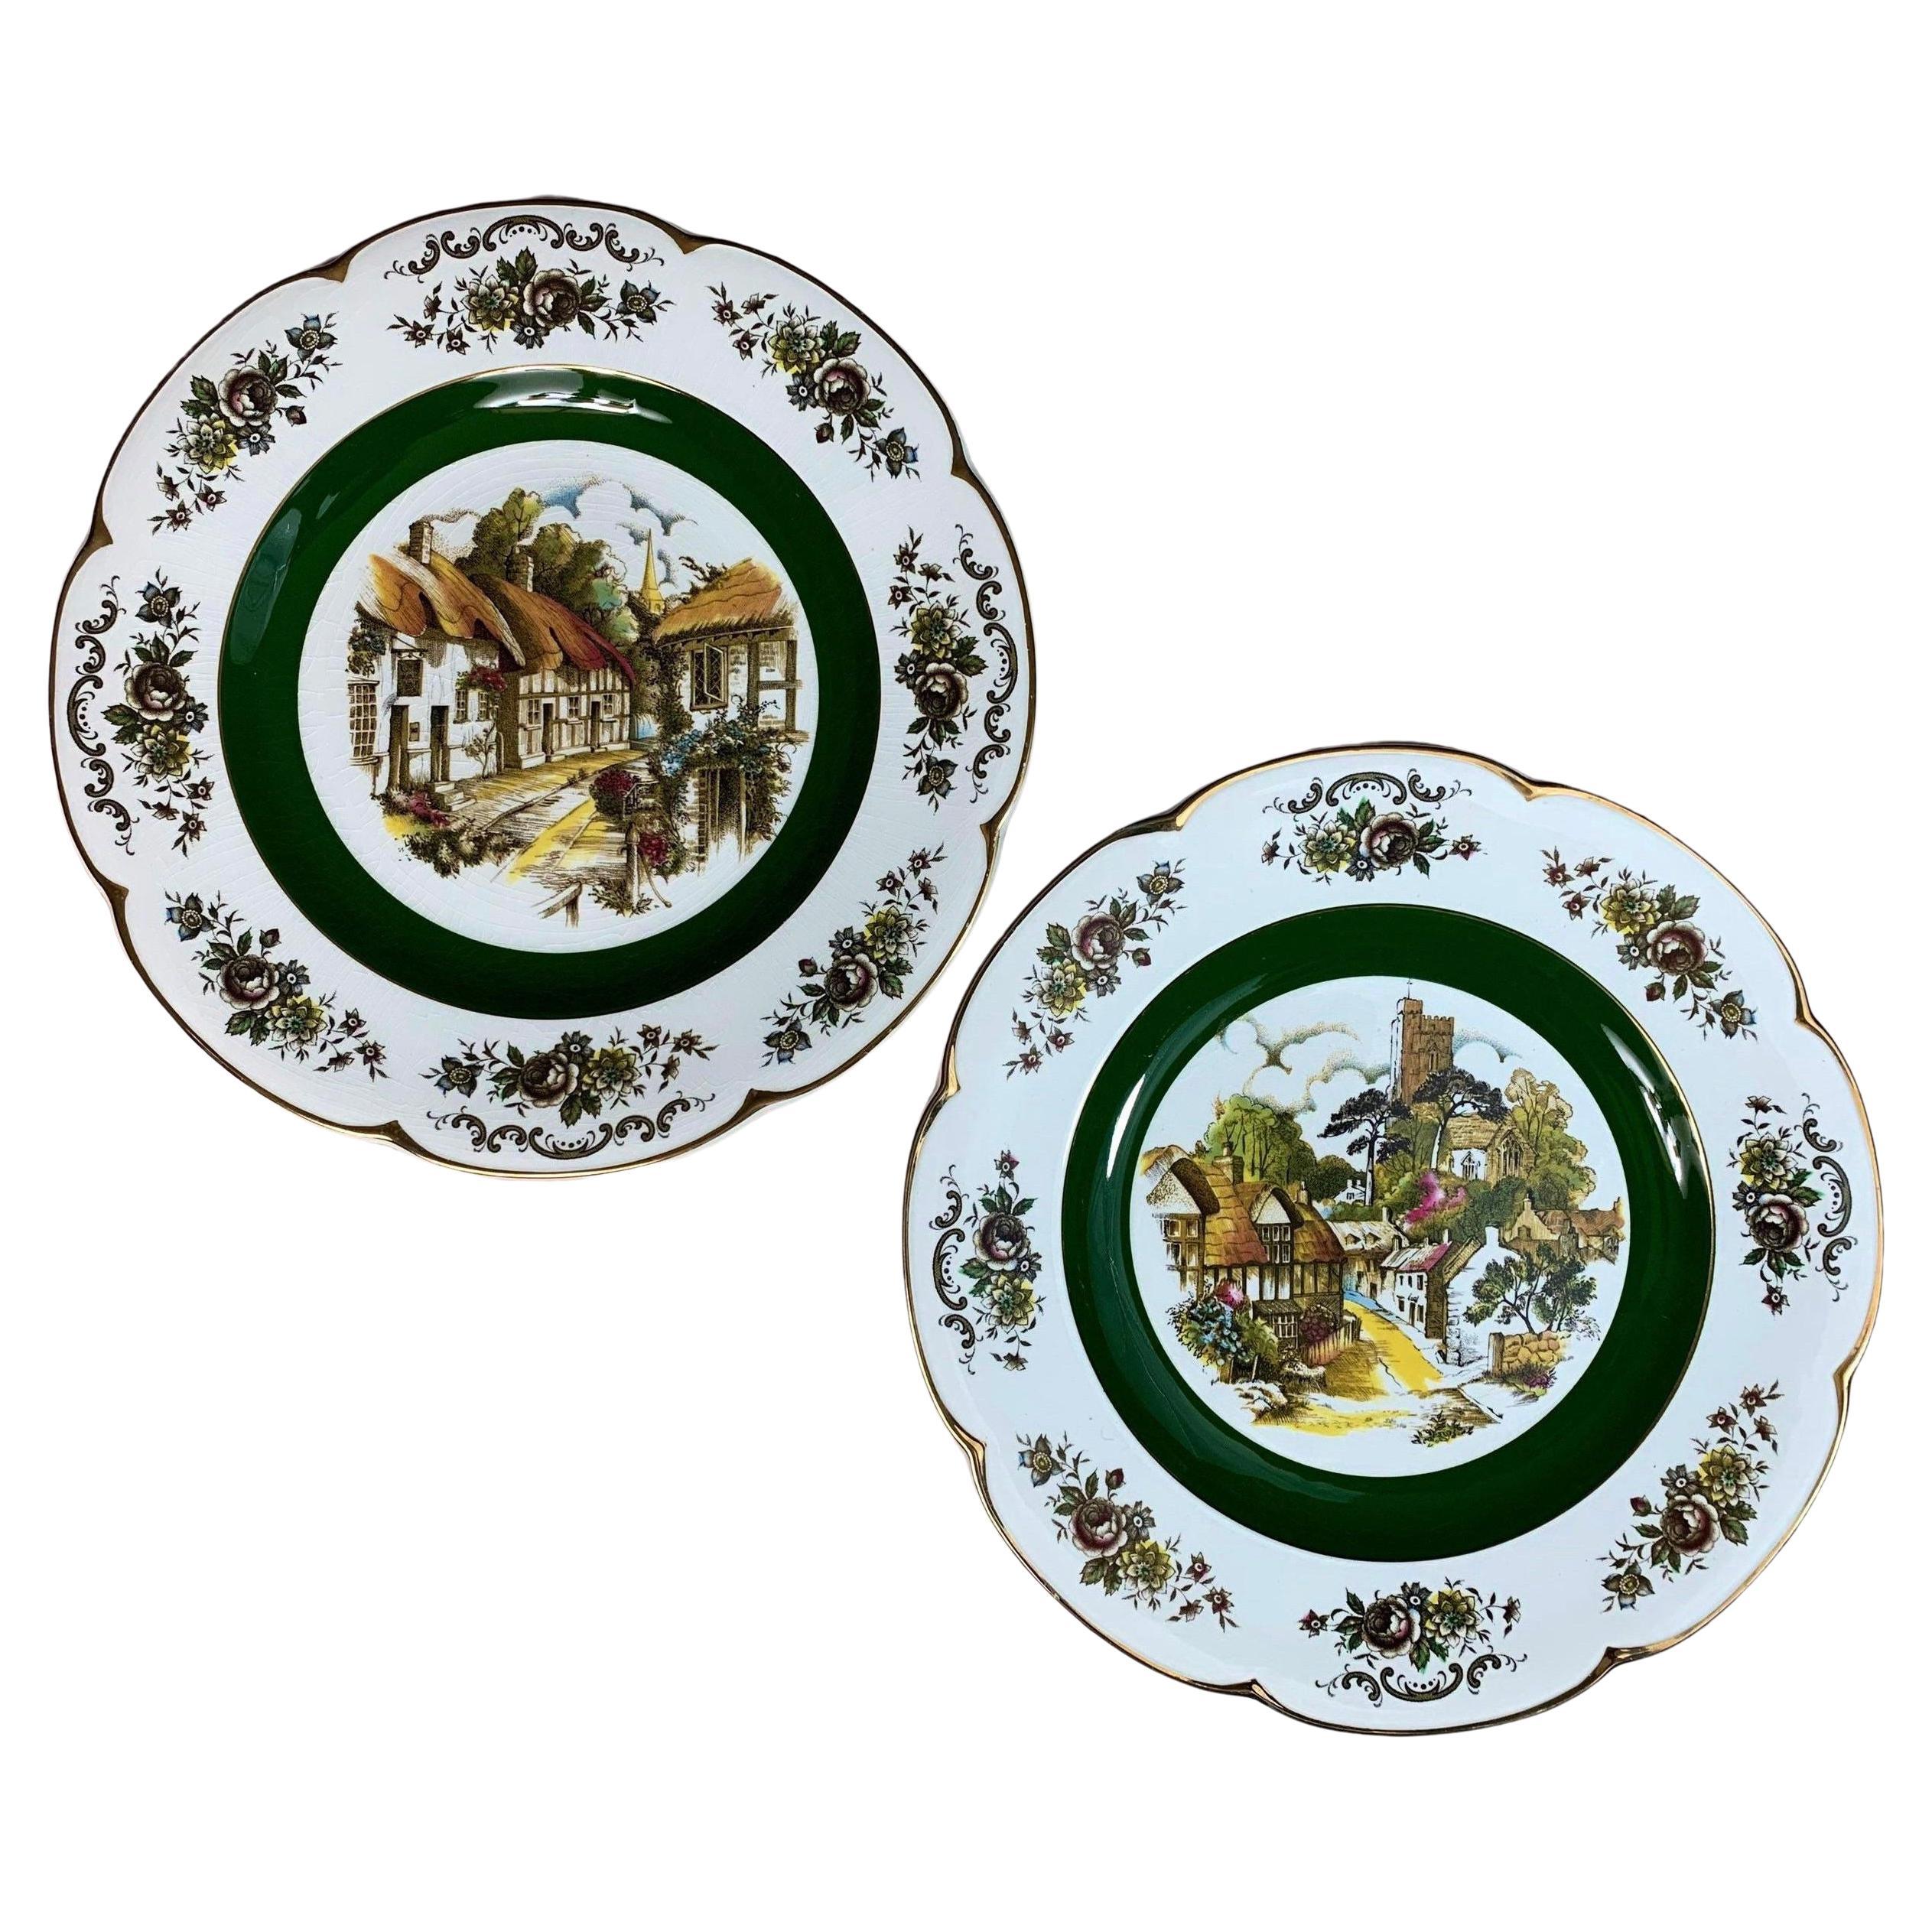 Wood and Sons Ironstone Ascot Service Plates - A Pair